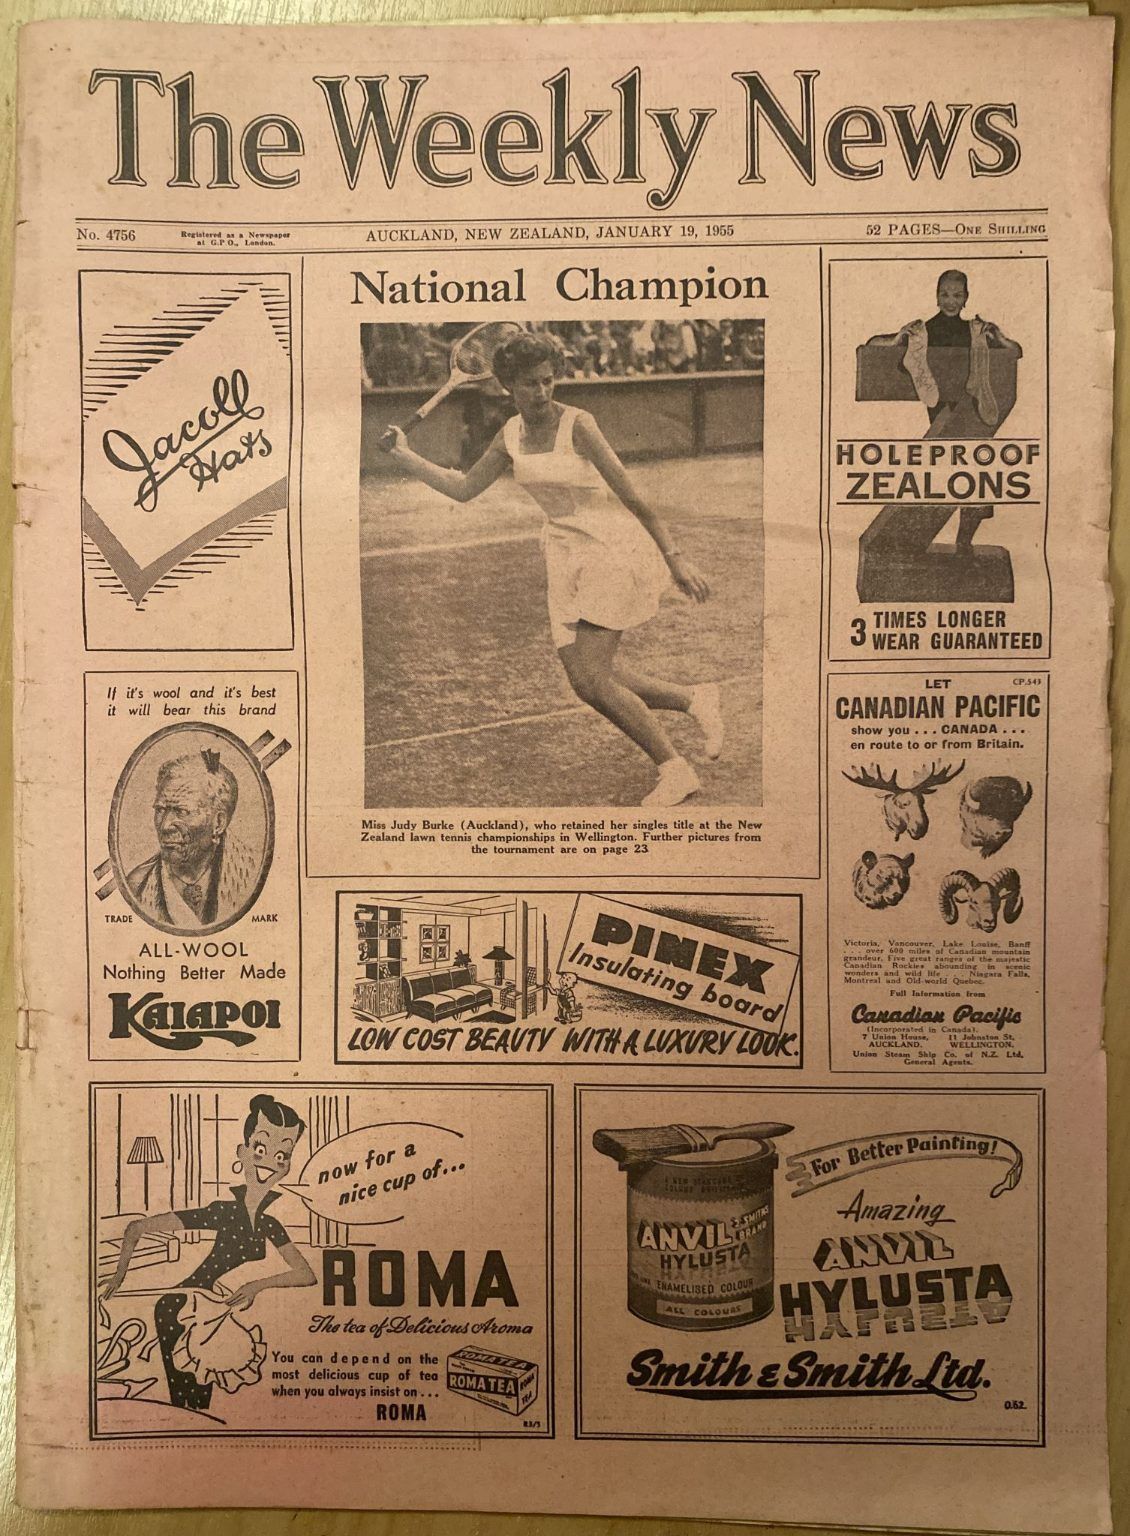 OLD NEWSPAPER: The Weekly News - No. 4756, 19 January 1955